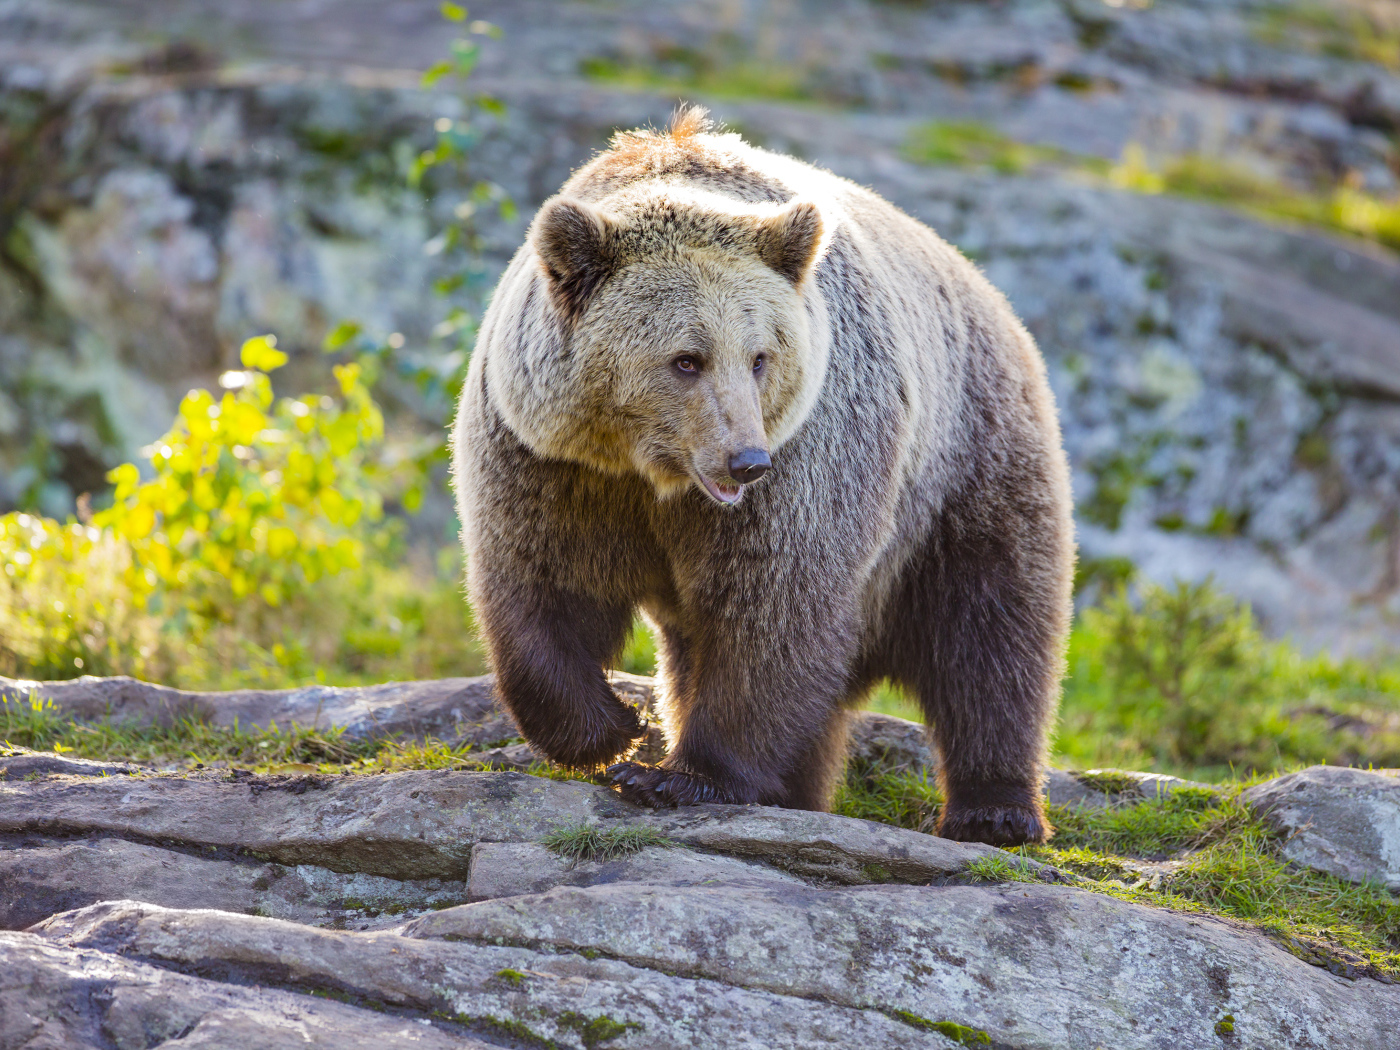 A large grizzly bear walks the rocks